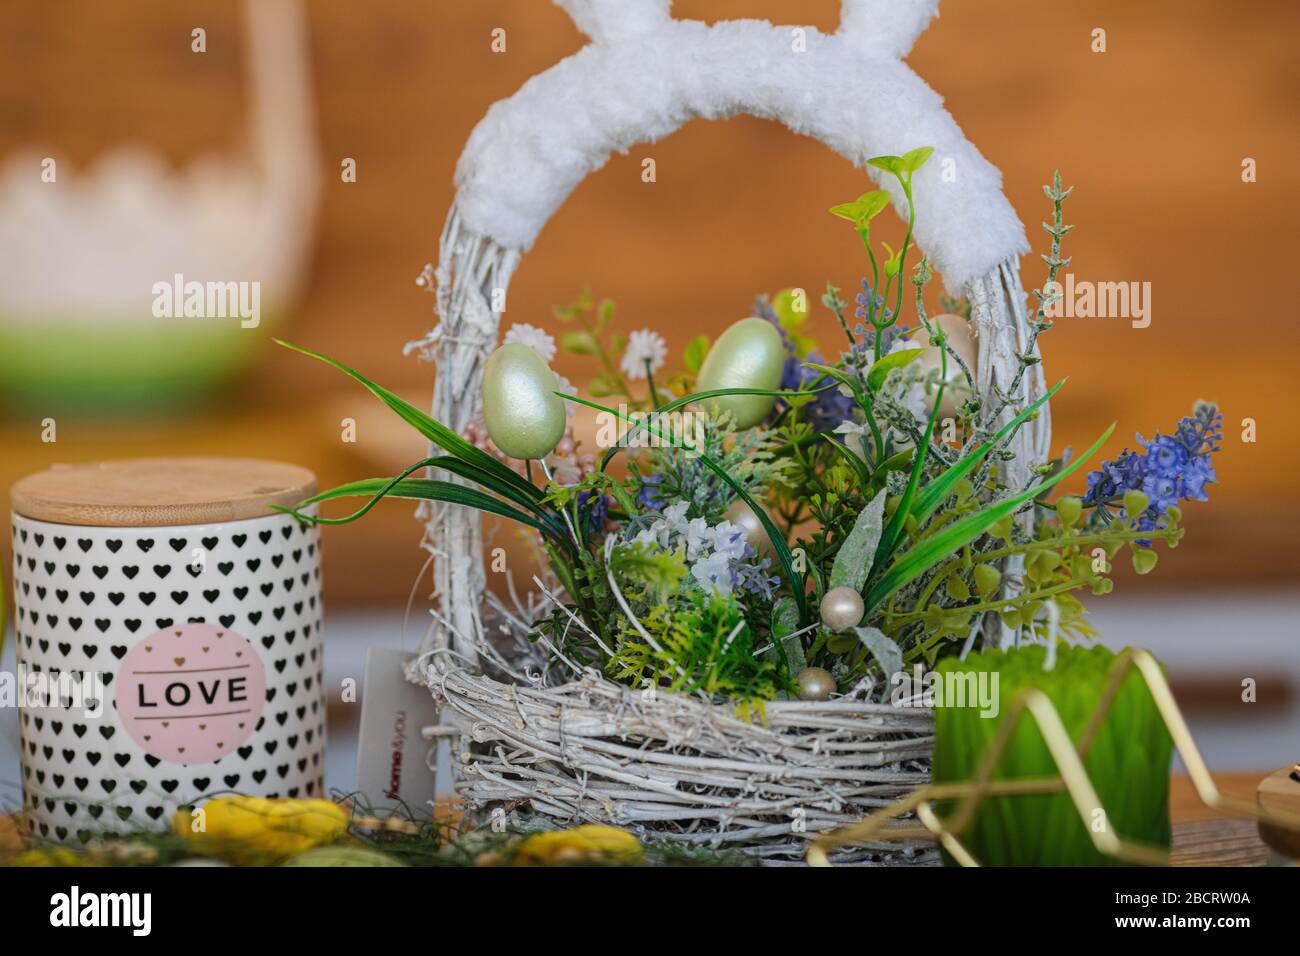 Festive Easter basket with flowers on the table Stock Photo